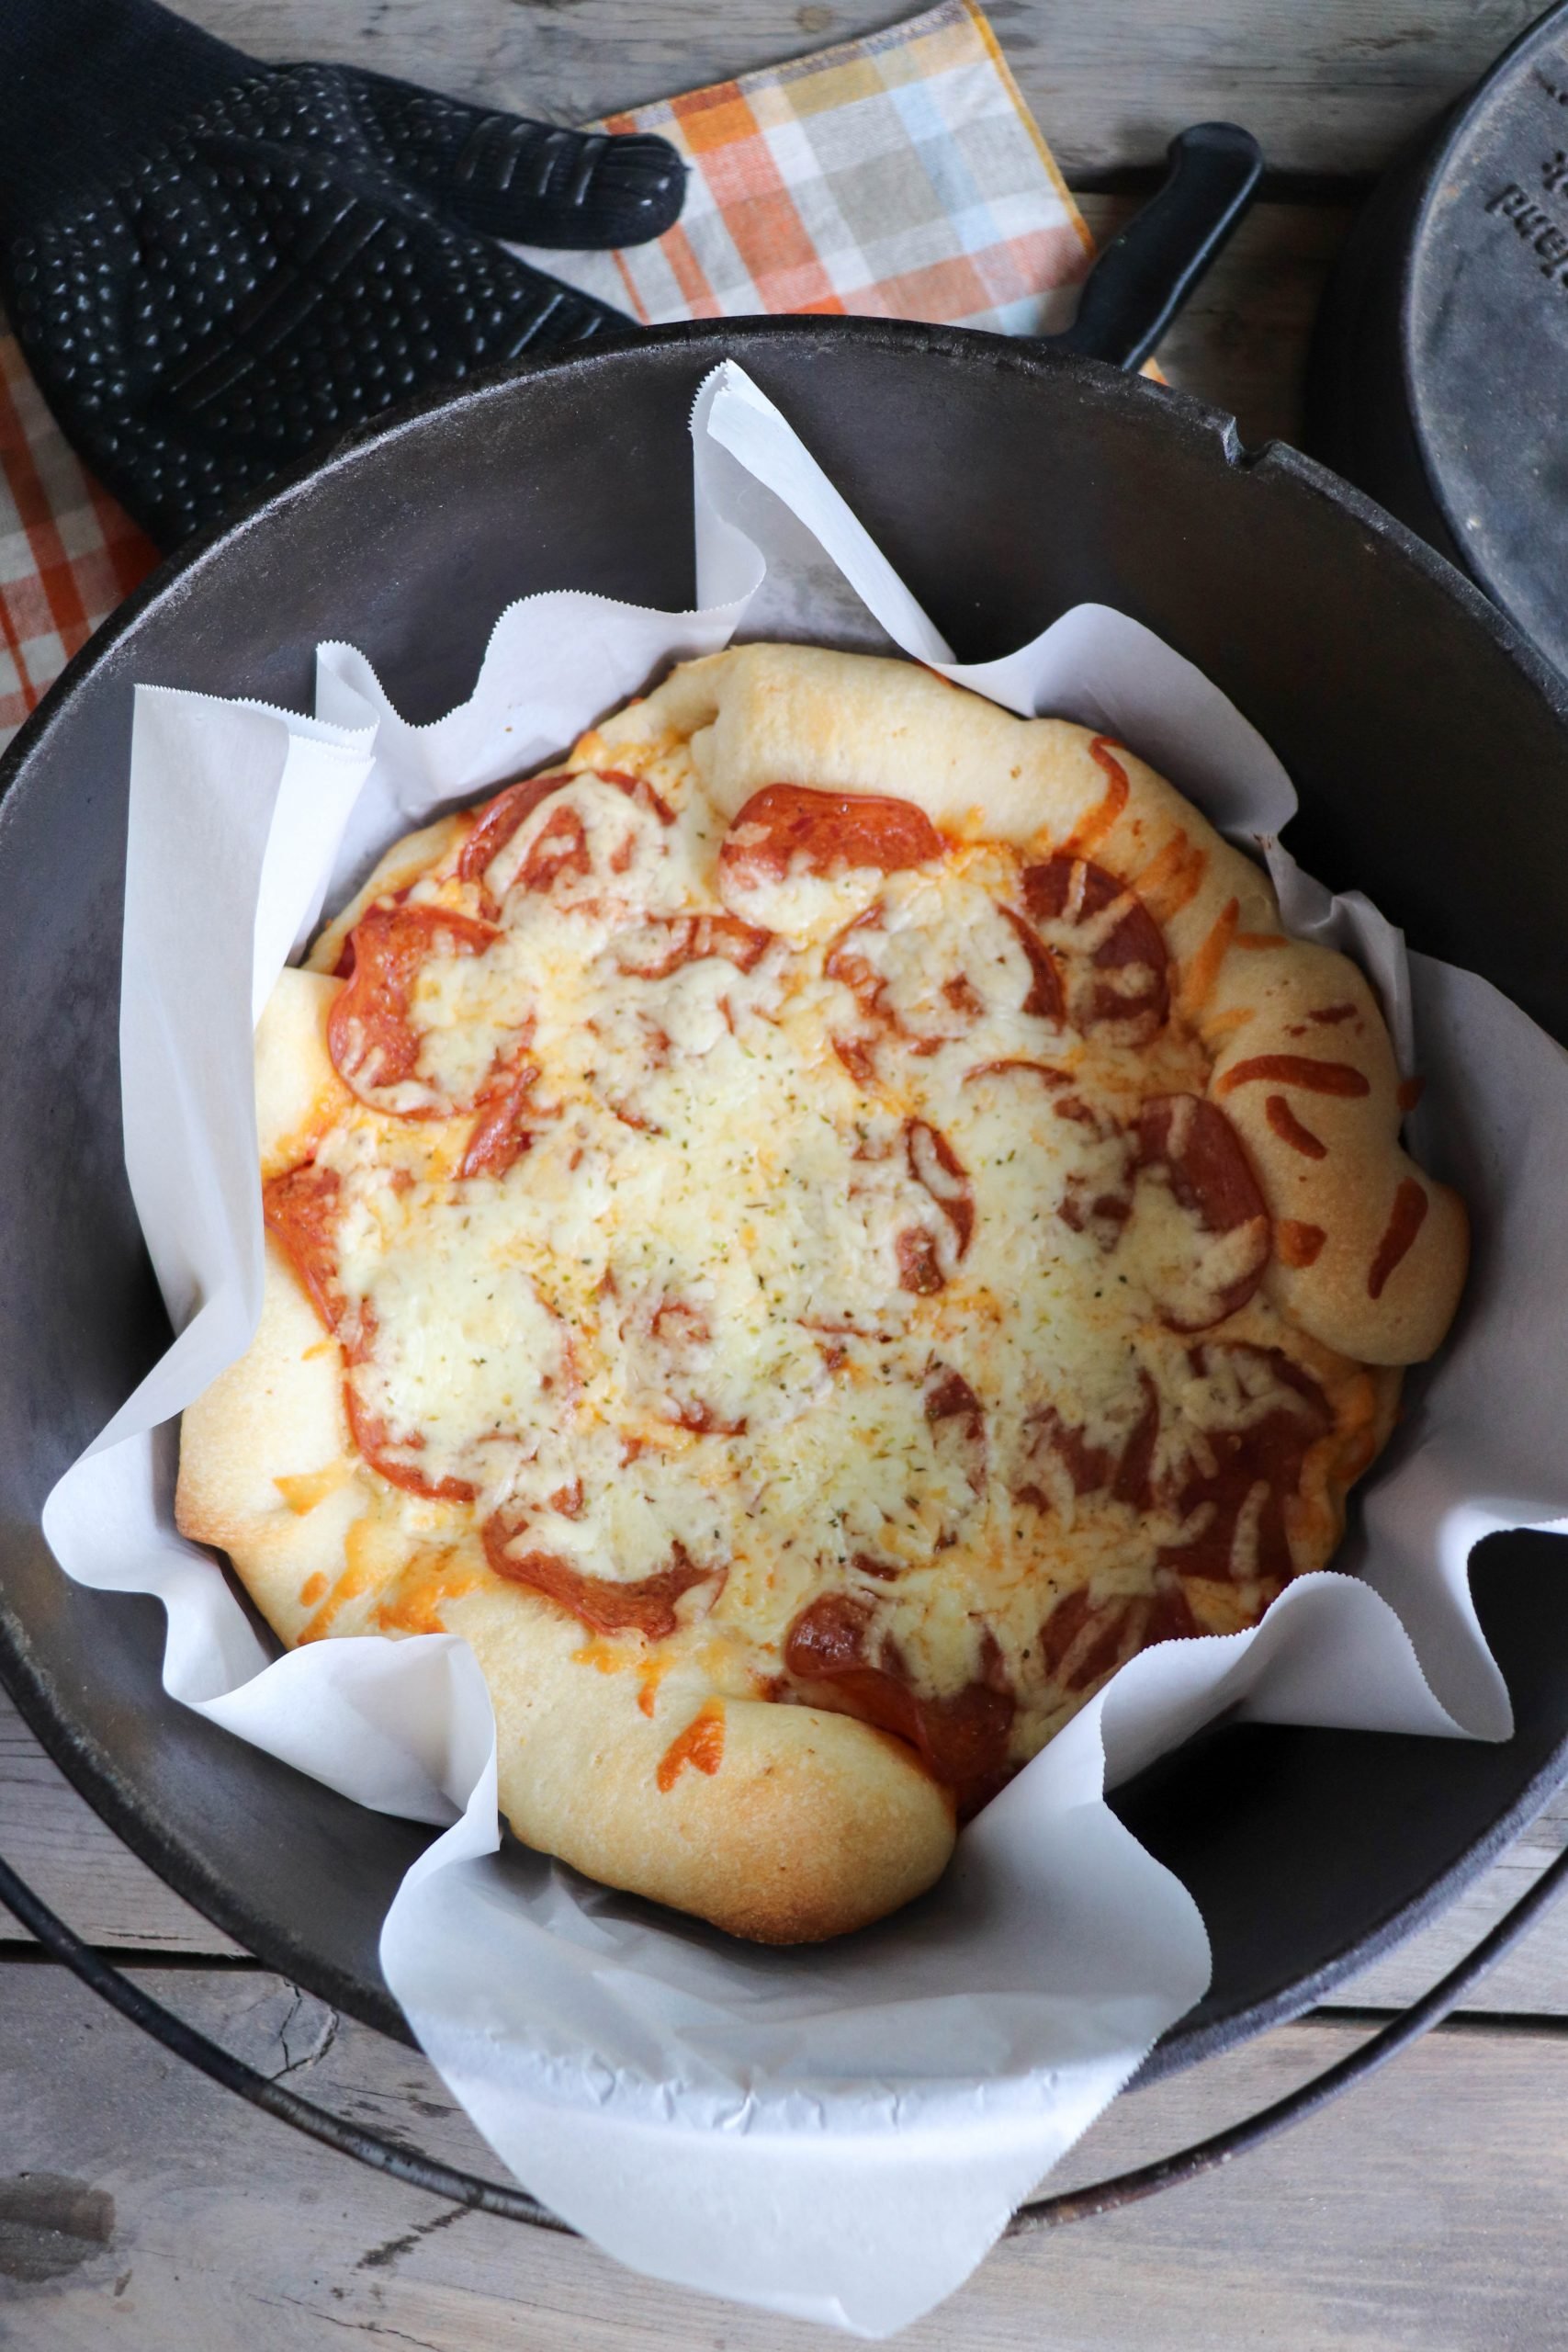 Dutch Oven Pizza Recipe: How to Make It